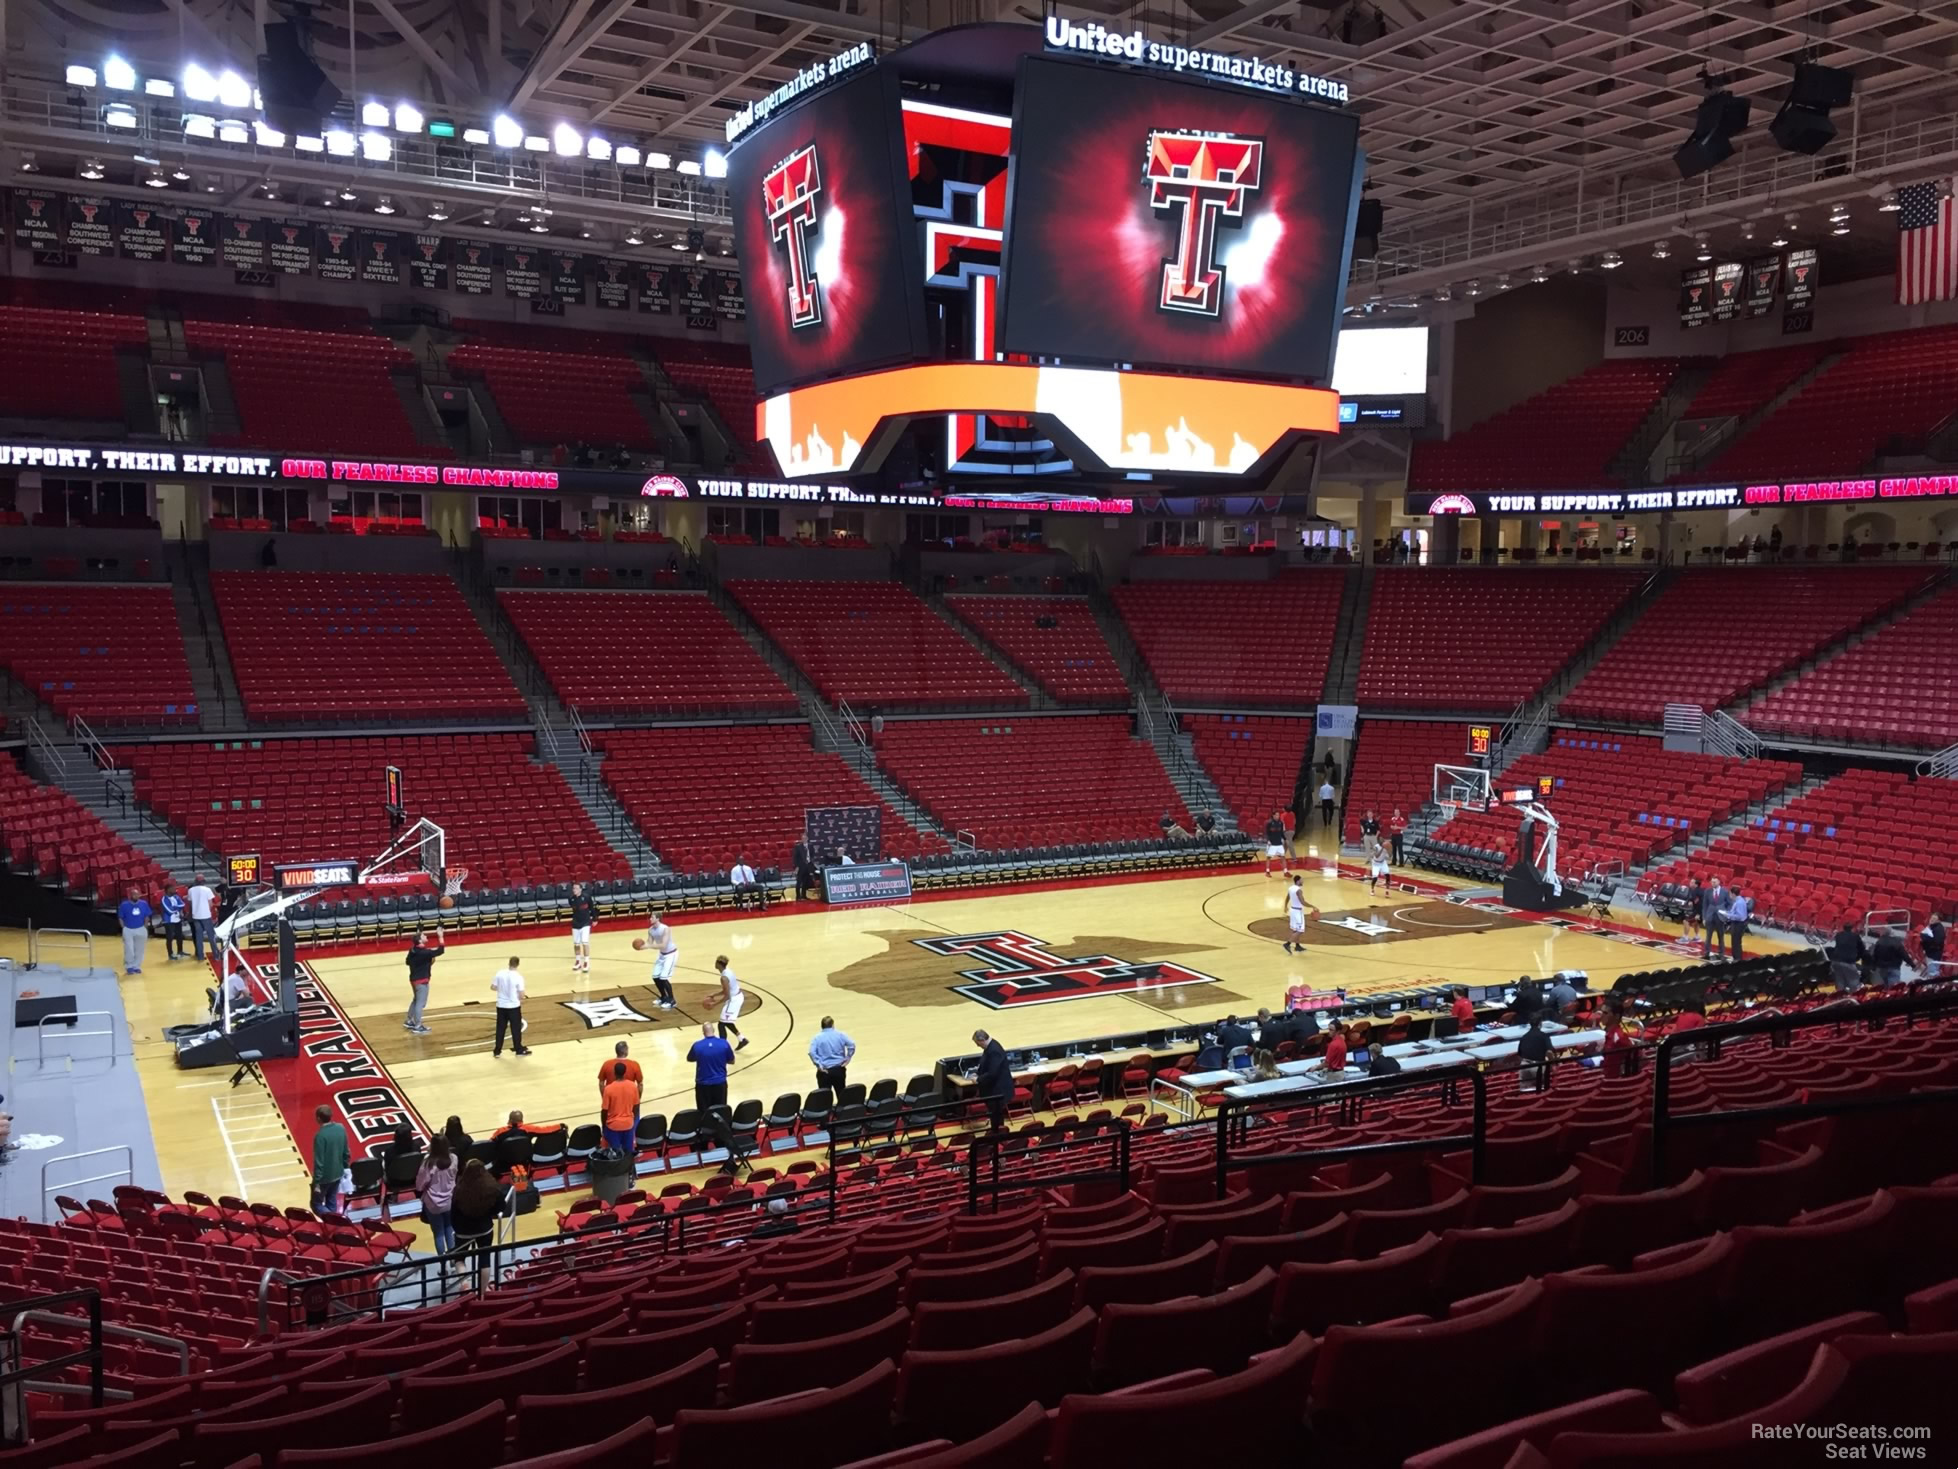 section 115, row 25 seat view  - united supermarkets arena